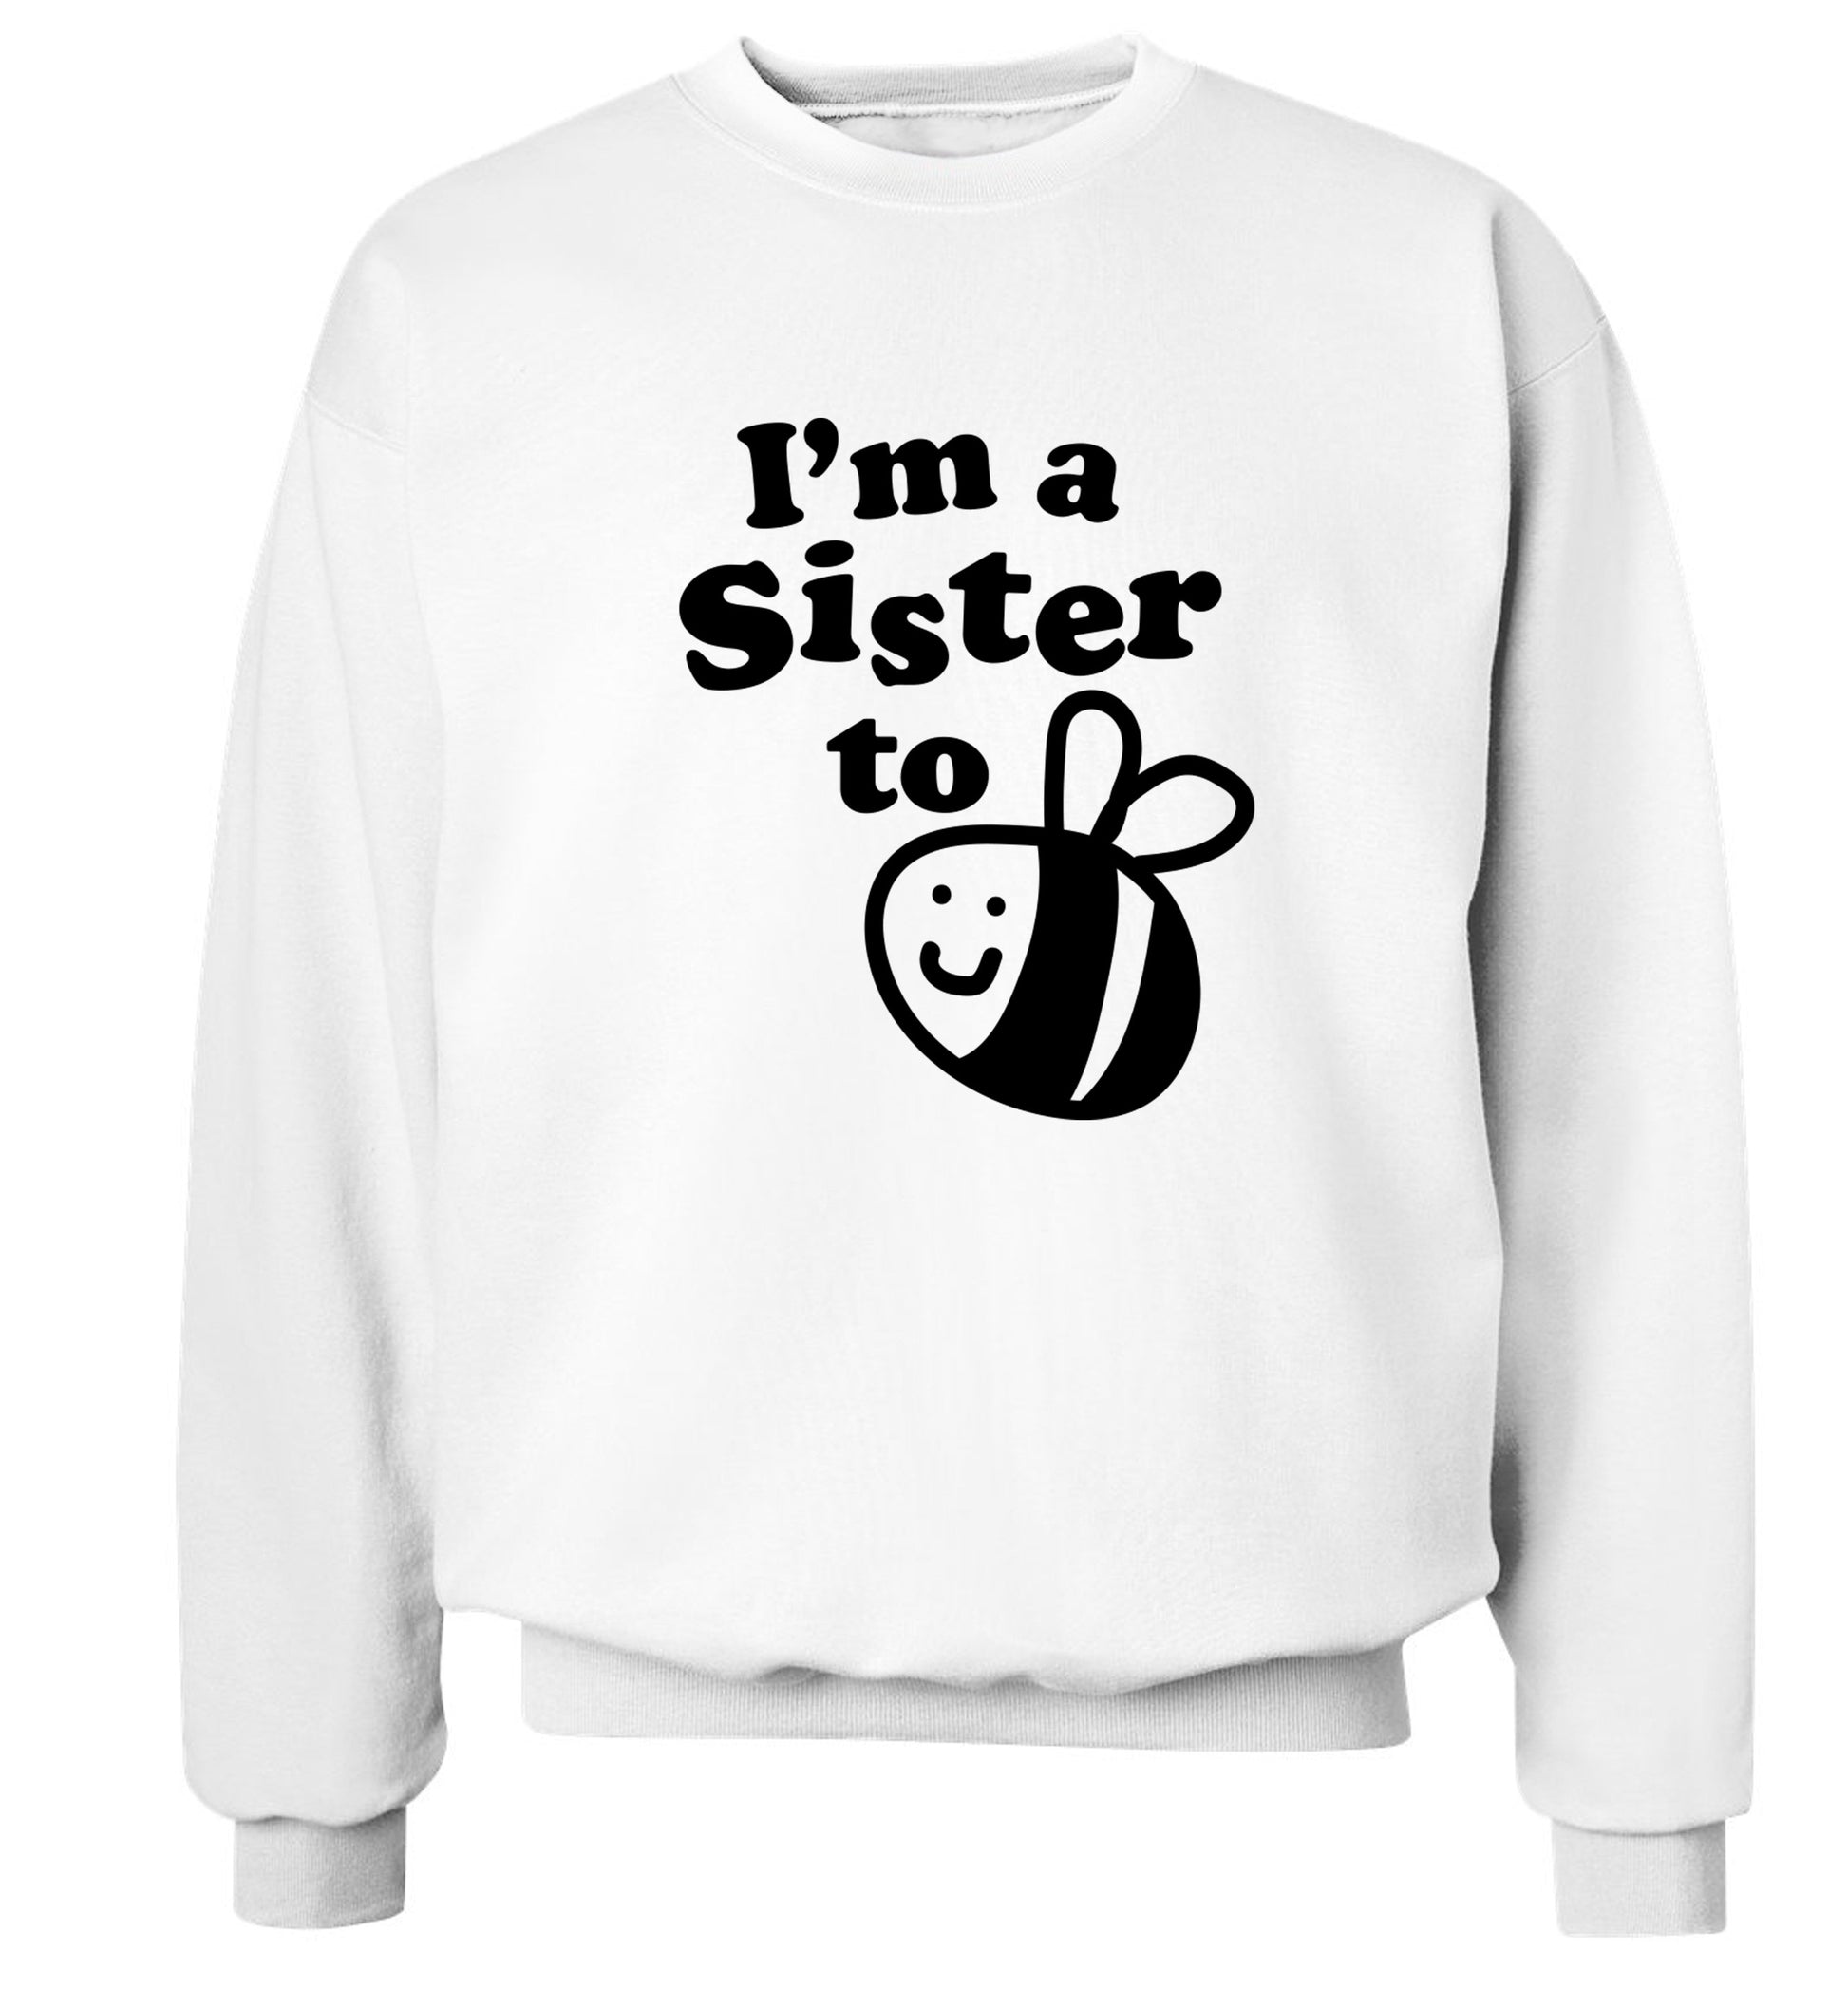 I'm a sister to be Adult's unisex white Sweater 2XL